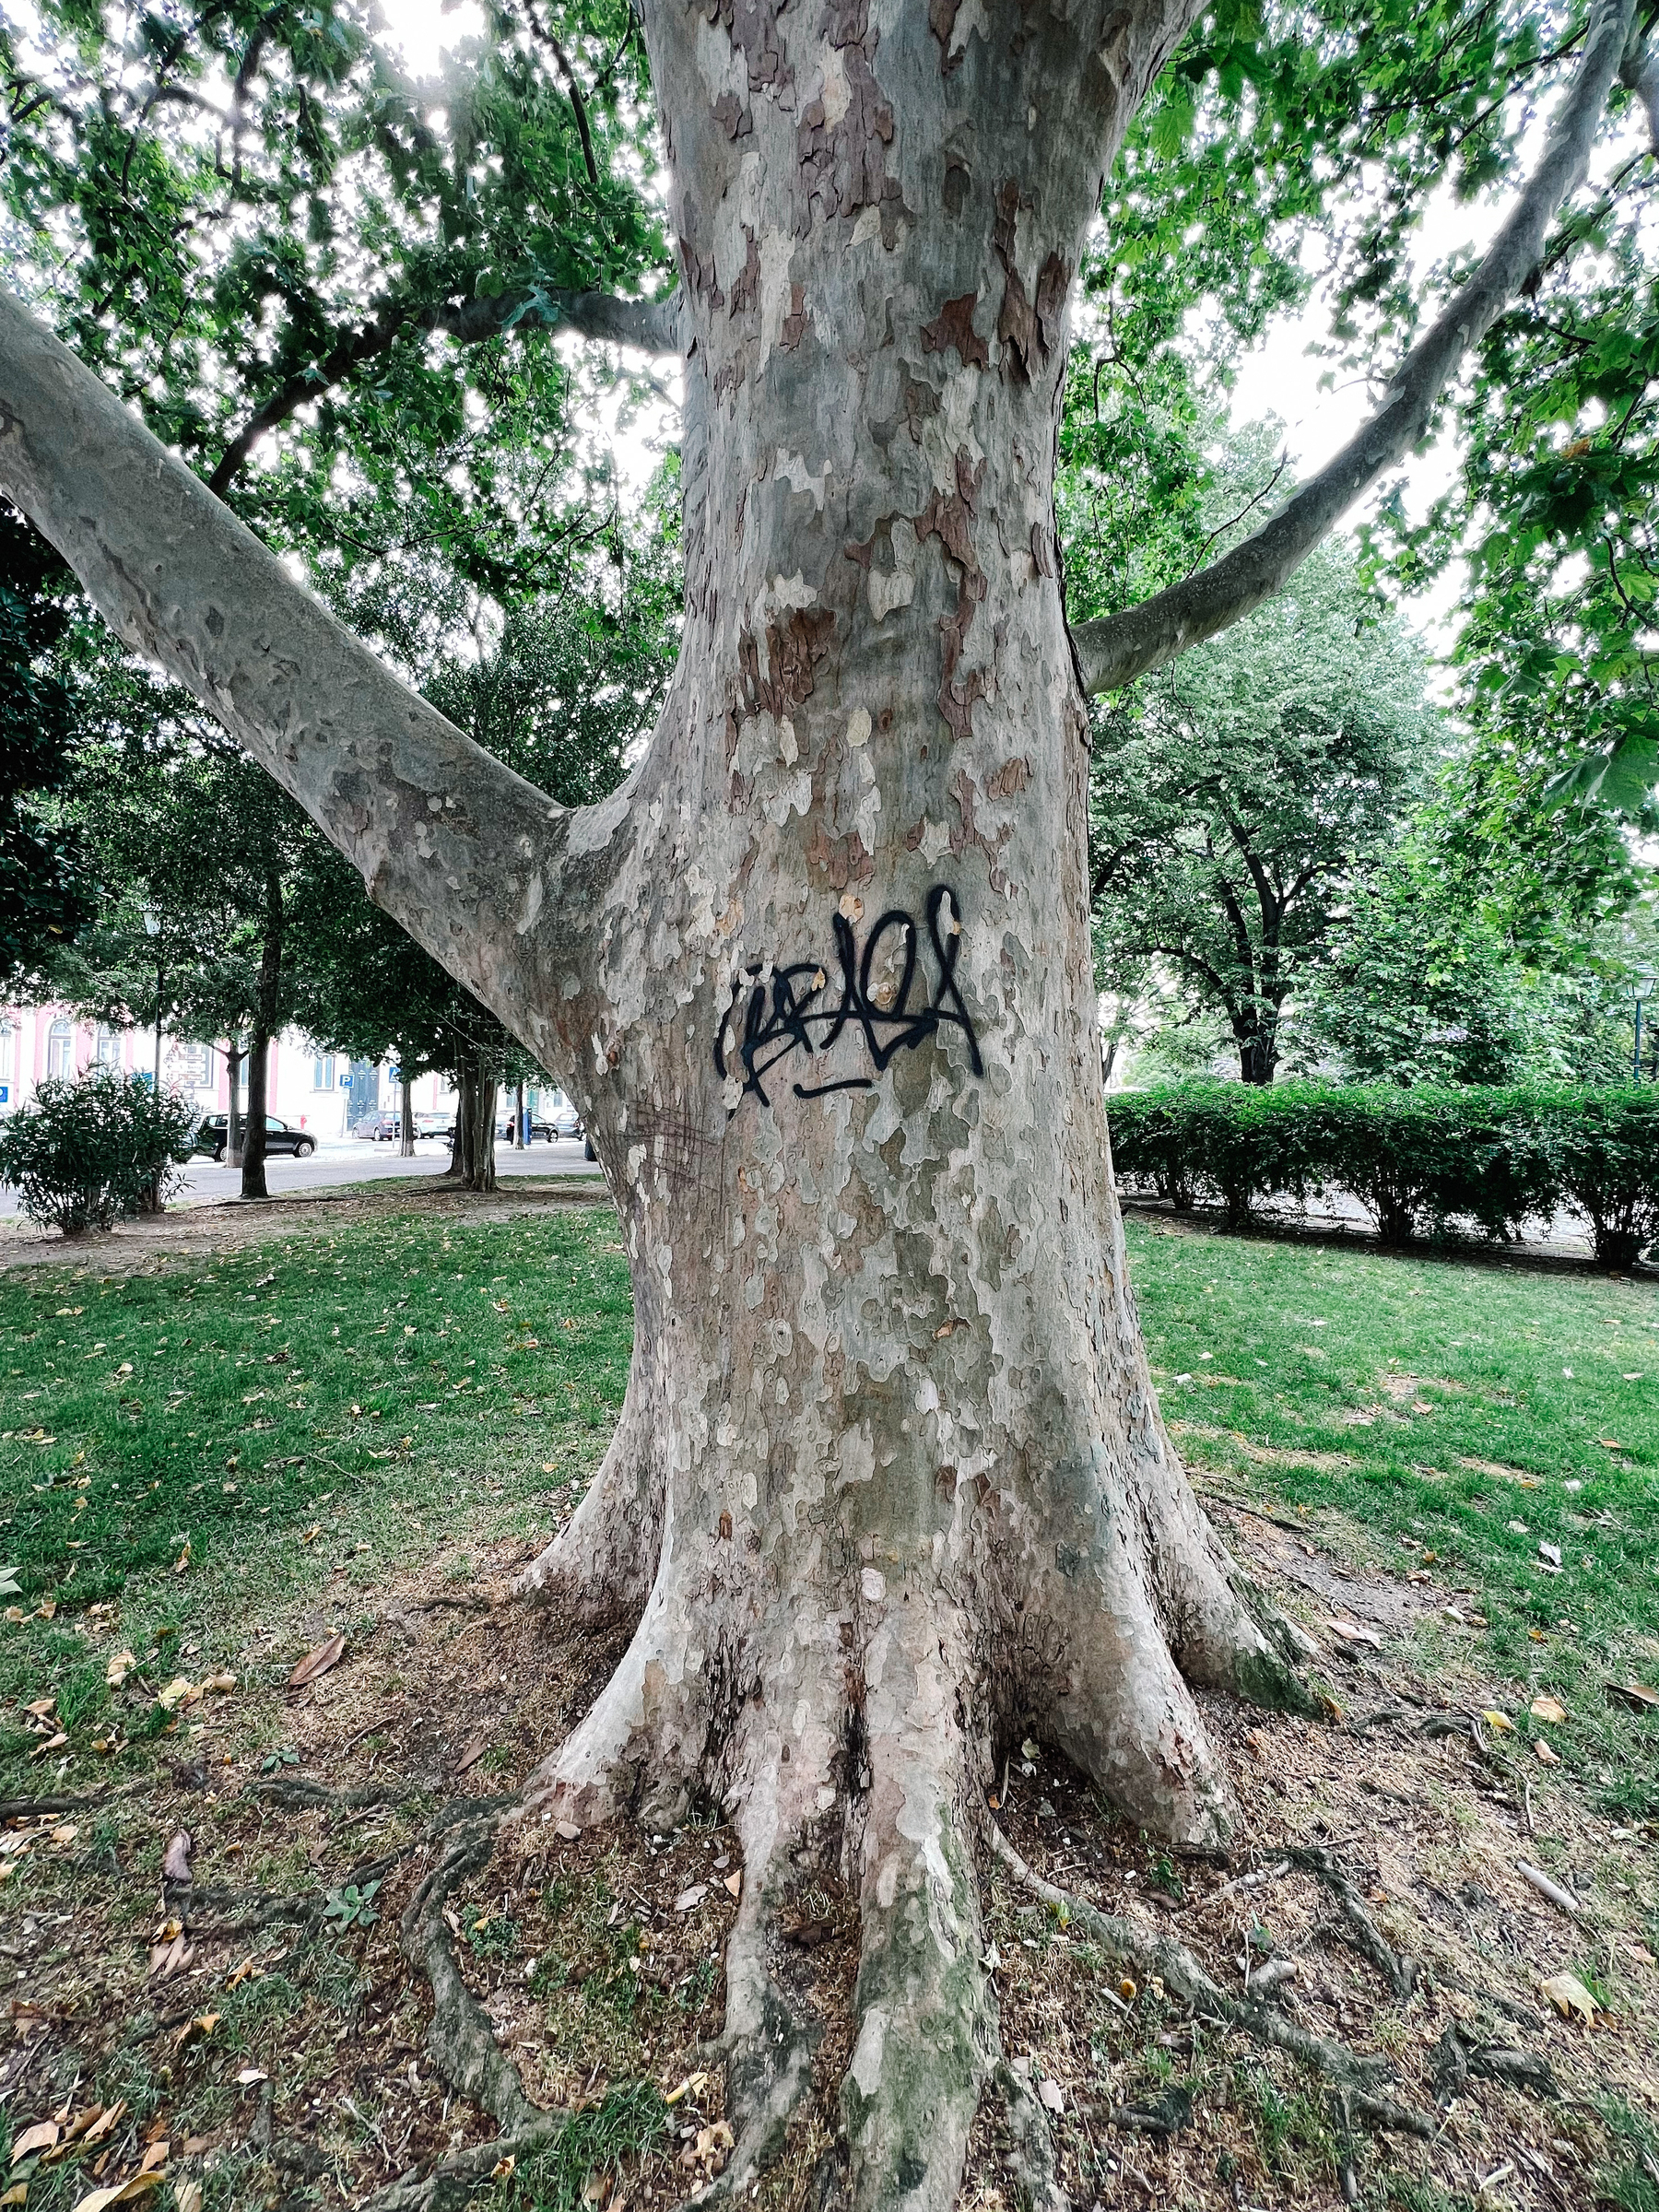 A tree with a tag graffitied on it. 